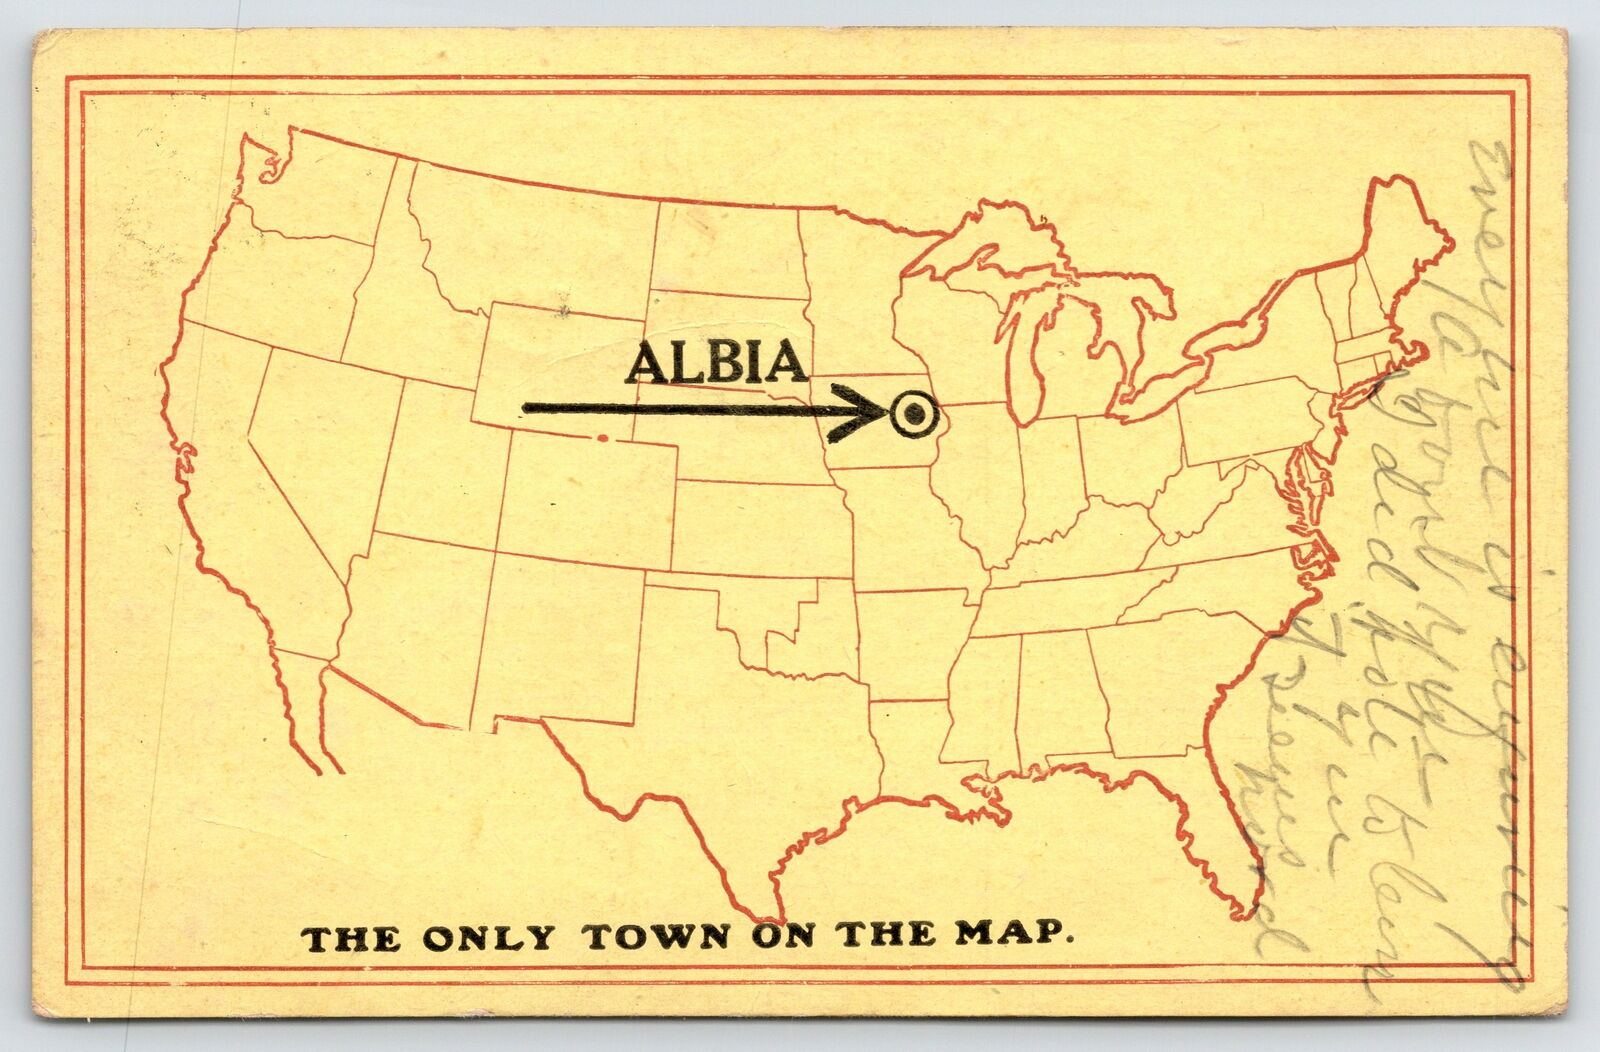 If Albia Iowa Is The Only Town on the Map~How Did This Get To Olney in Dudley?